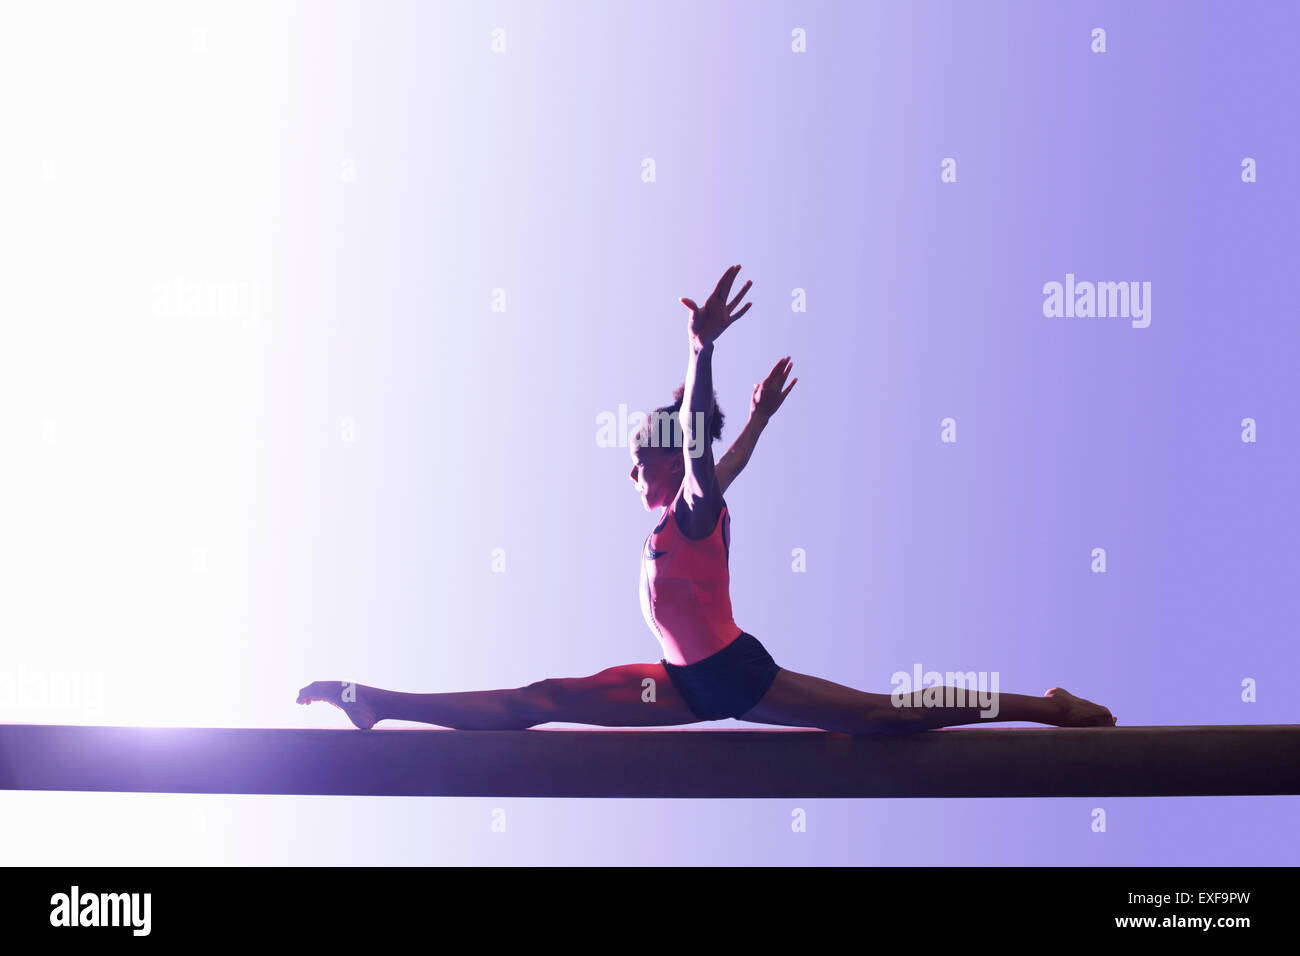 Young gymnast performing on balance beam Stock Photo